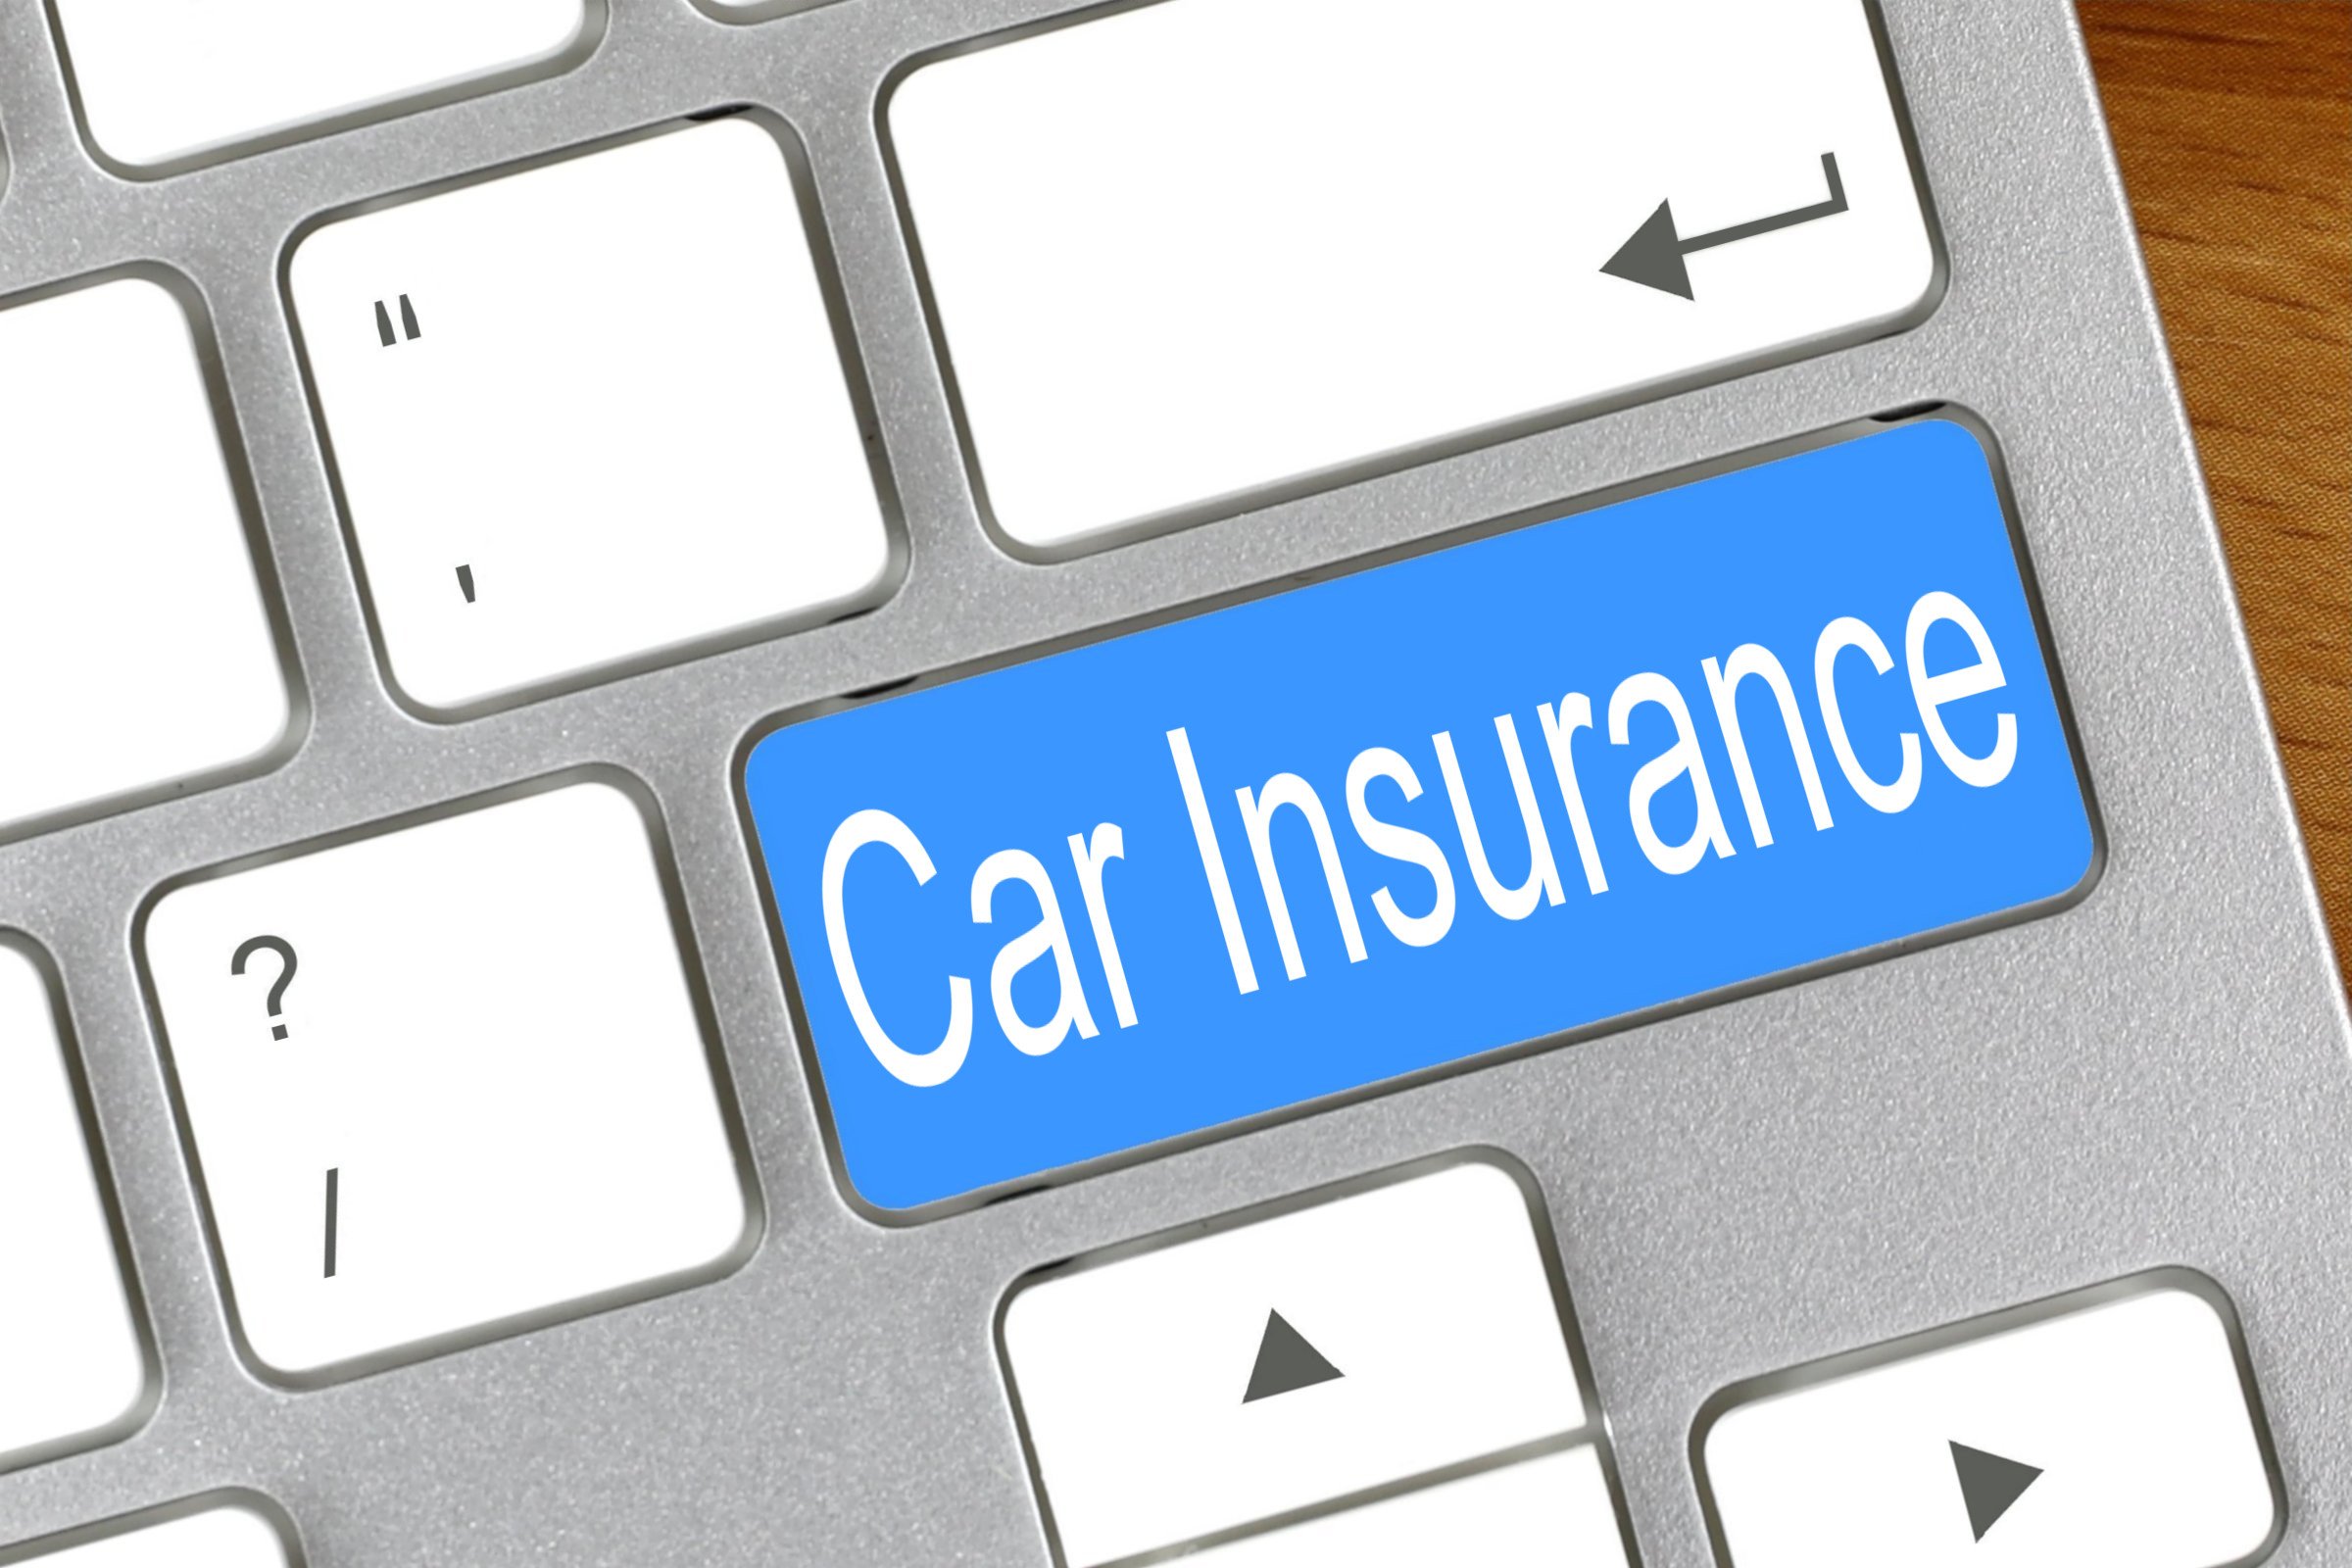 Car Insurance - Free of Charge Creative Commons Keyboard image